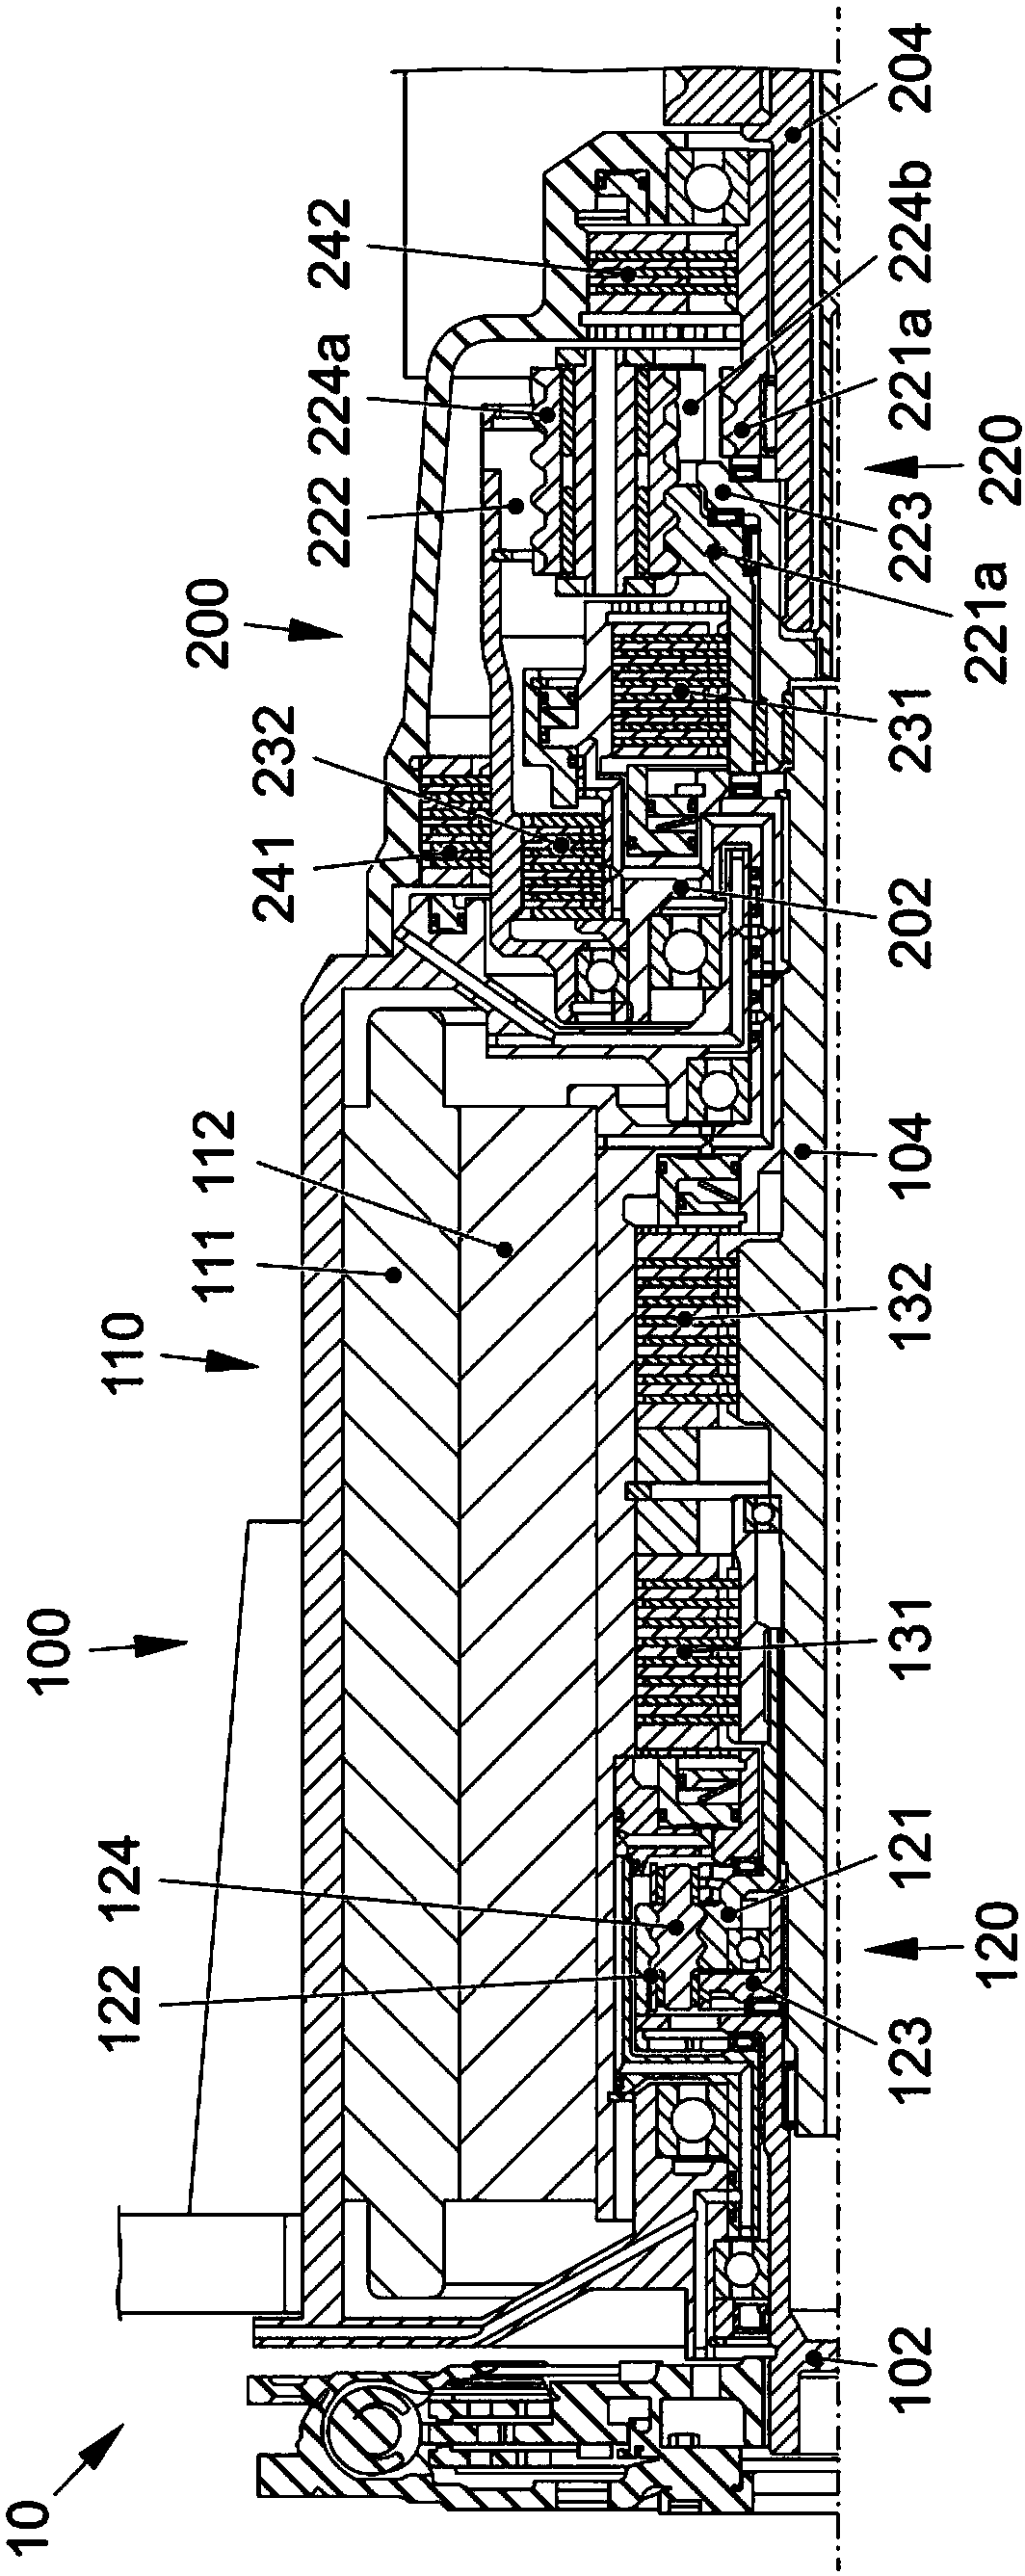 Multi-stage hybrid powertrain for a motor vehicle